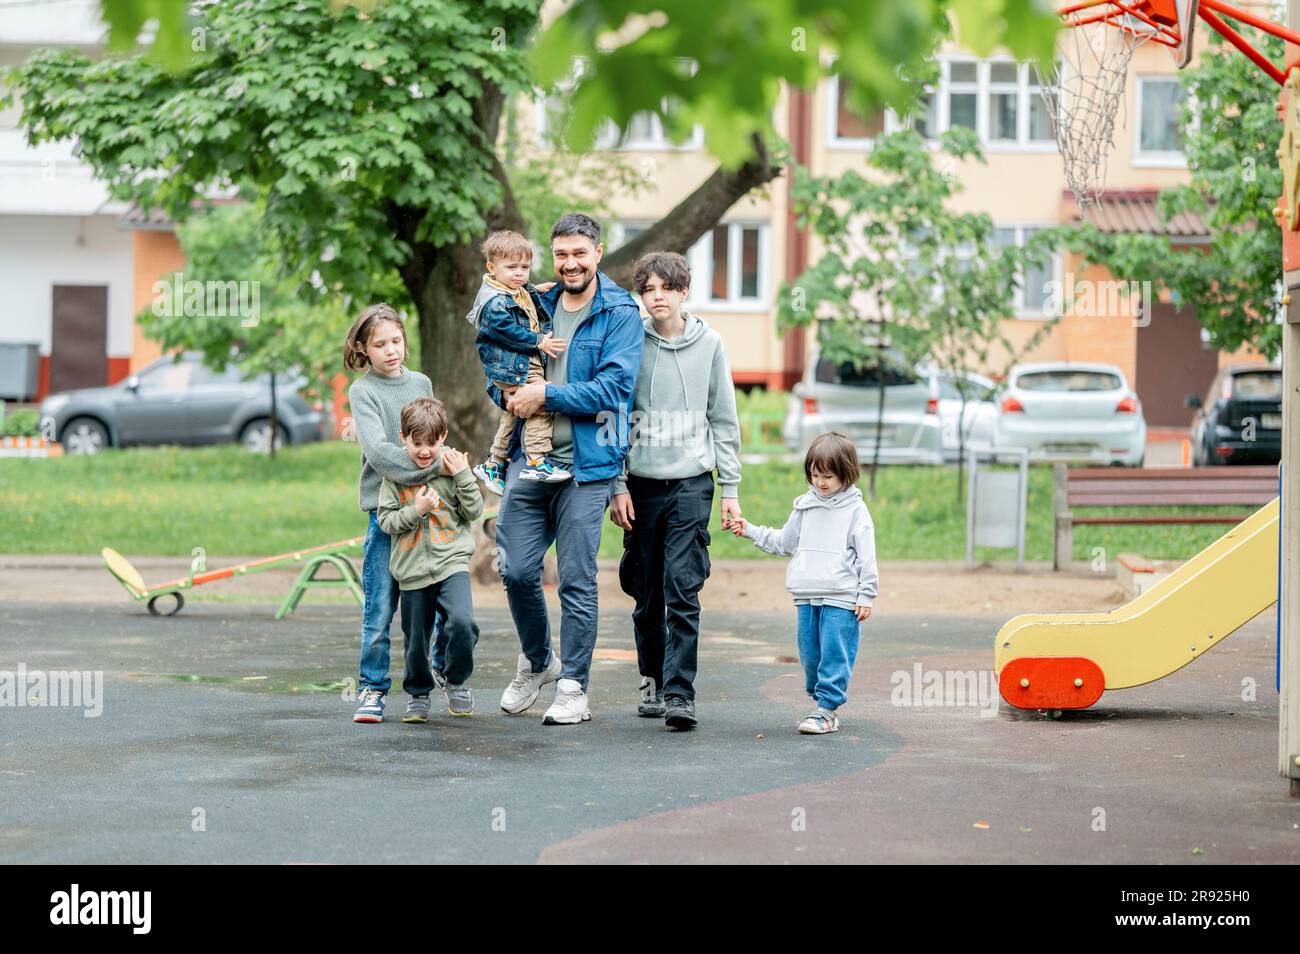 Happy father walking with children on playground Stock Photo